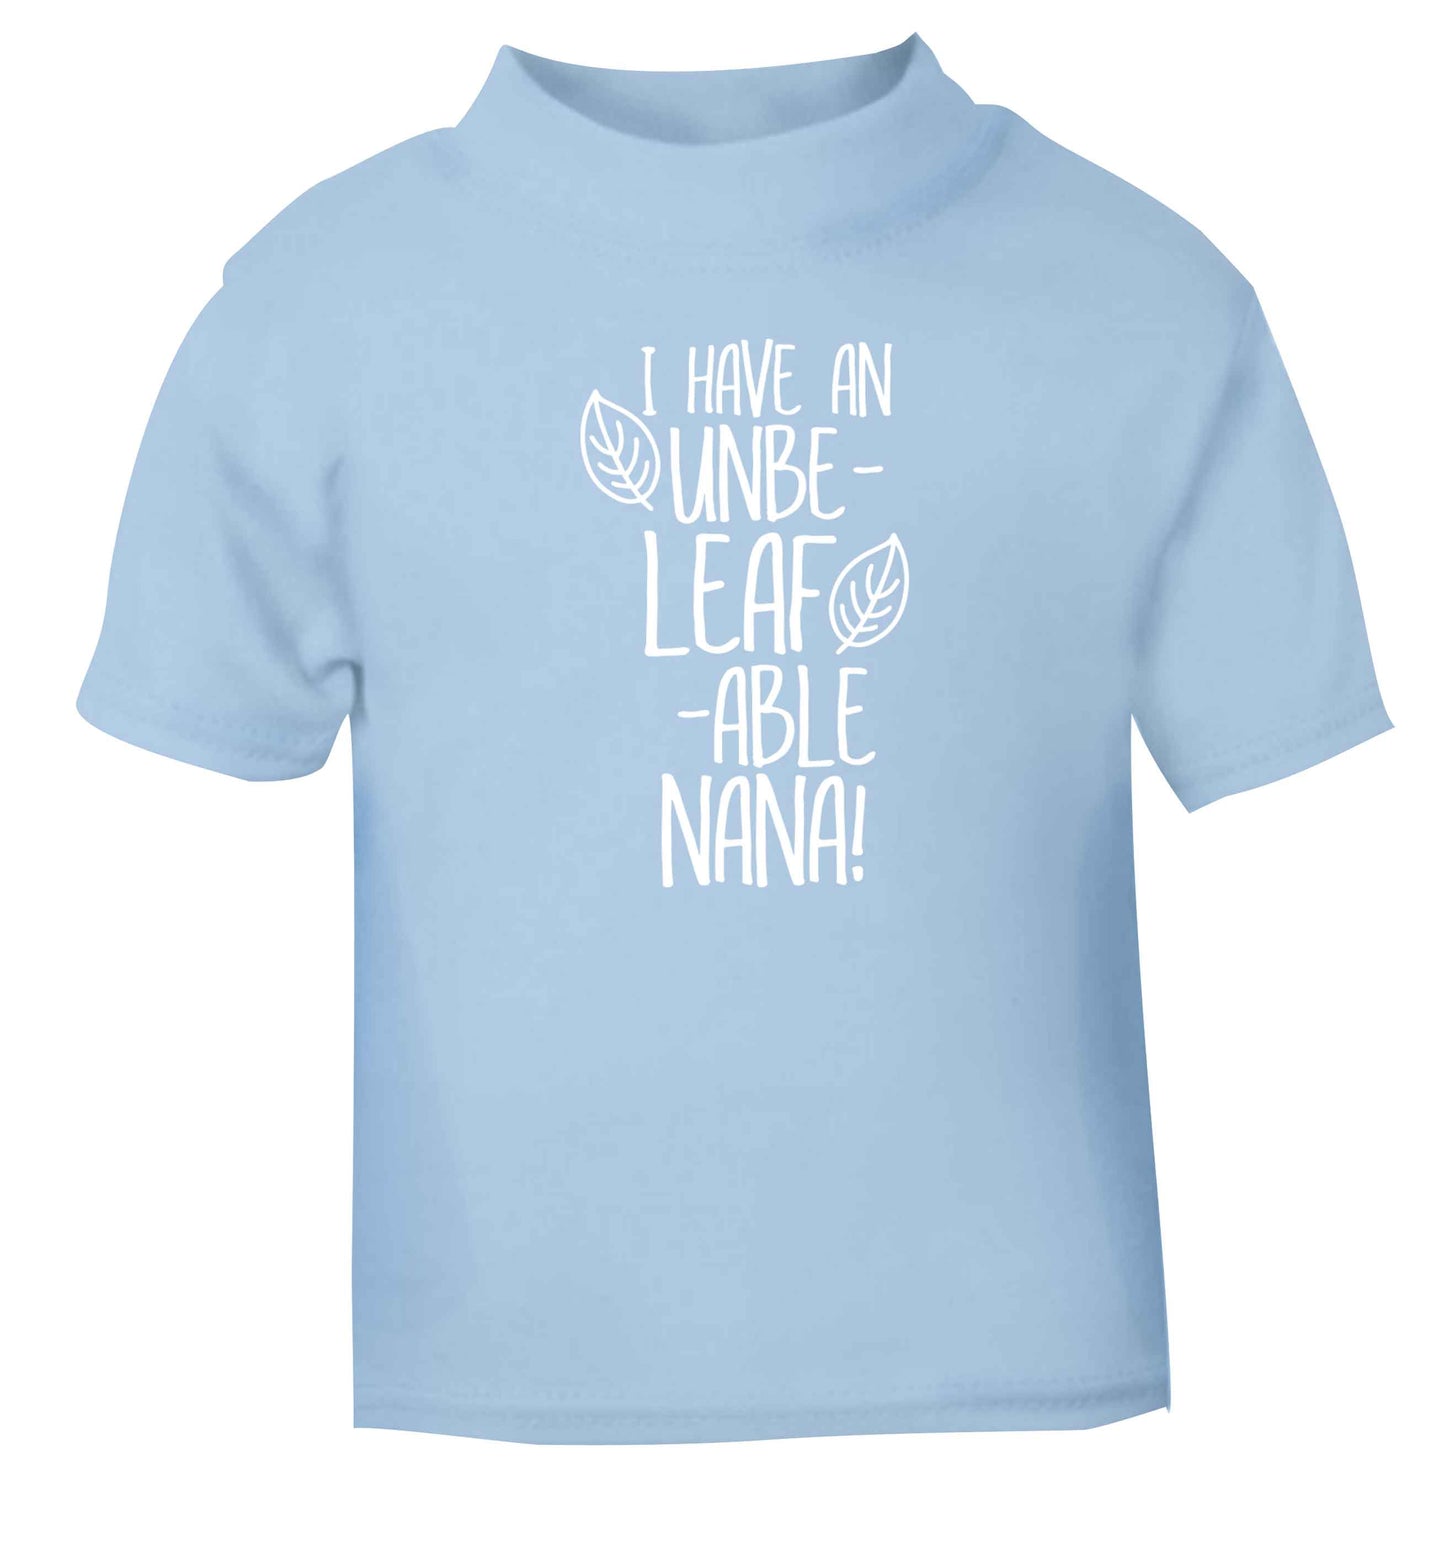 I have an unbe-leaf-able nana light blue Baby Toddler Tshirt 2 Years